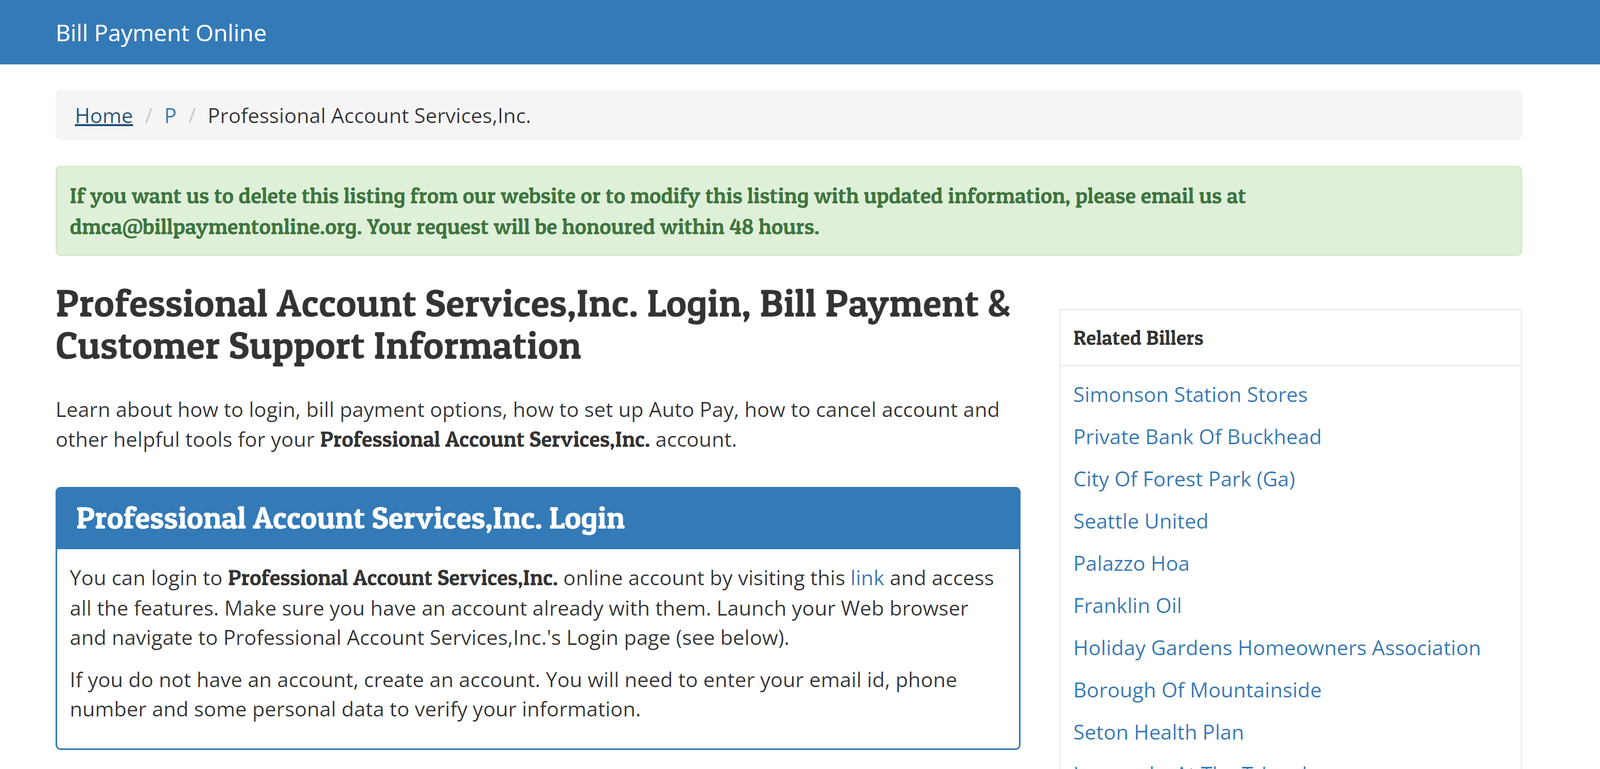 Professional Account Services,Inc. Login, Bill Payment & Customer Support Information